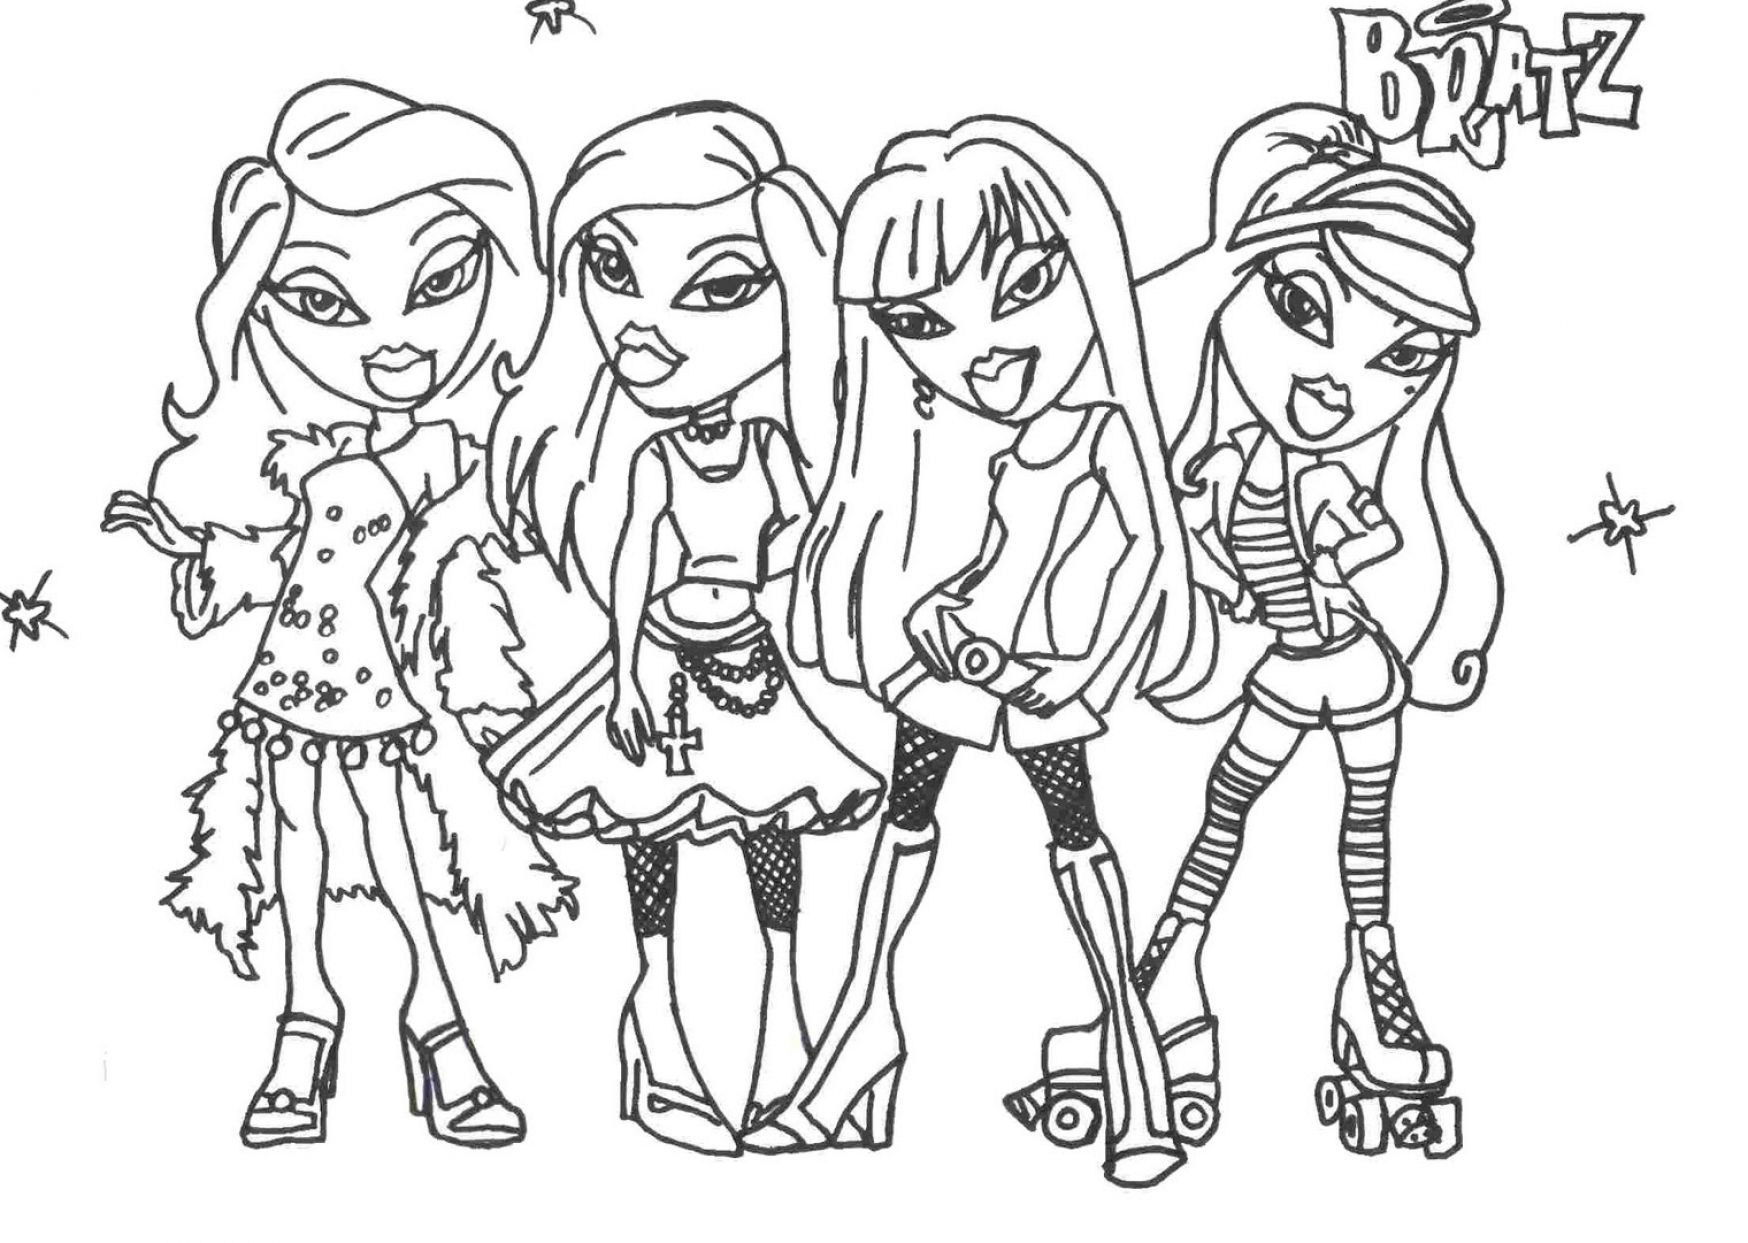 Bratz Girls Coloring Pages